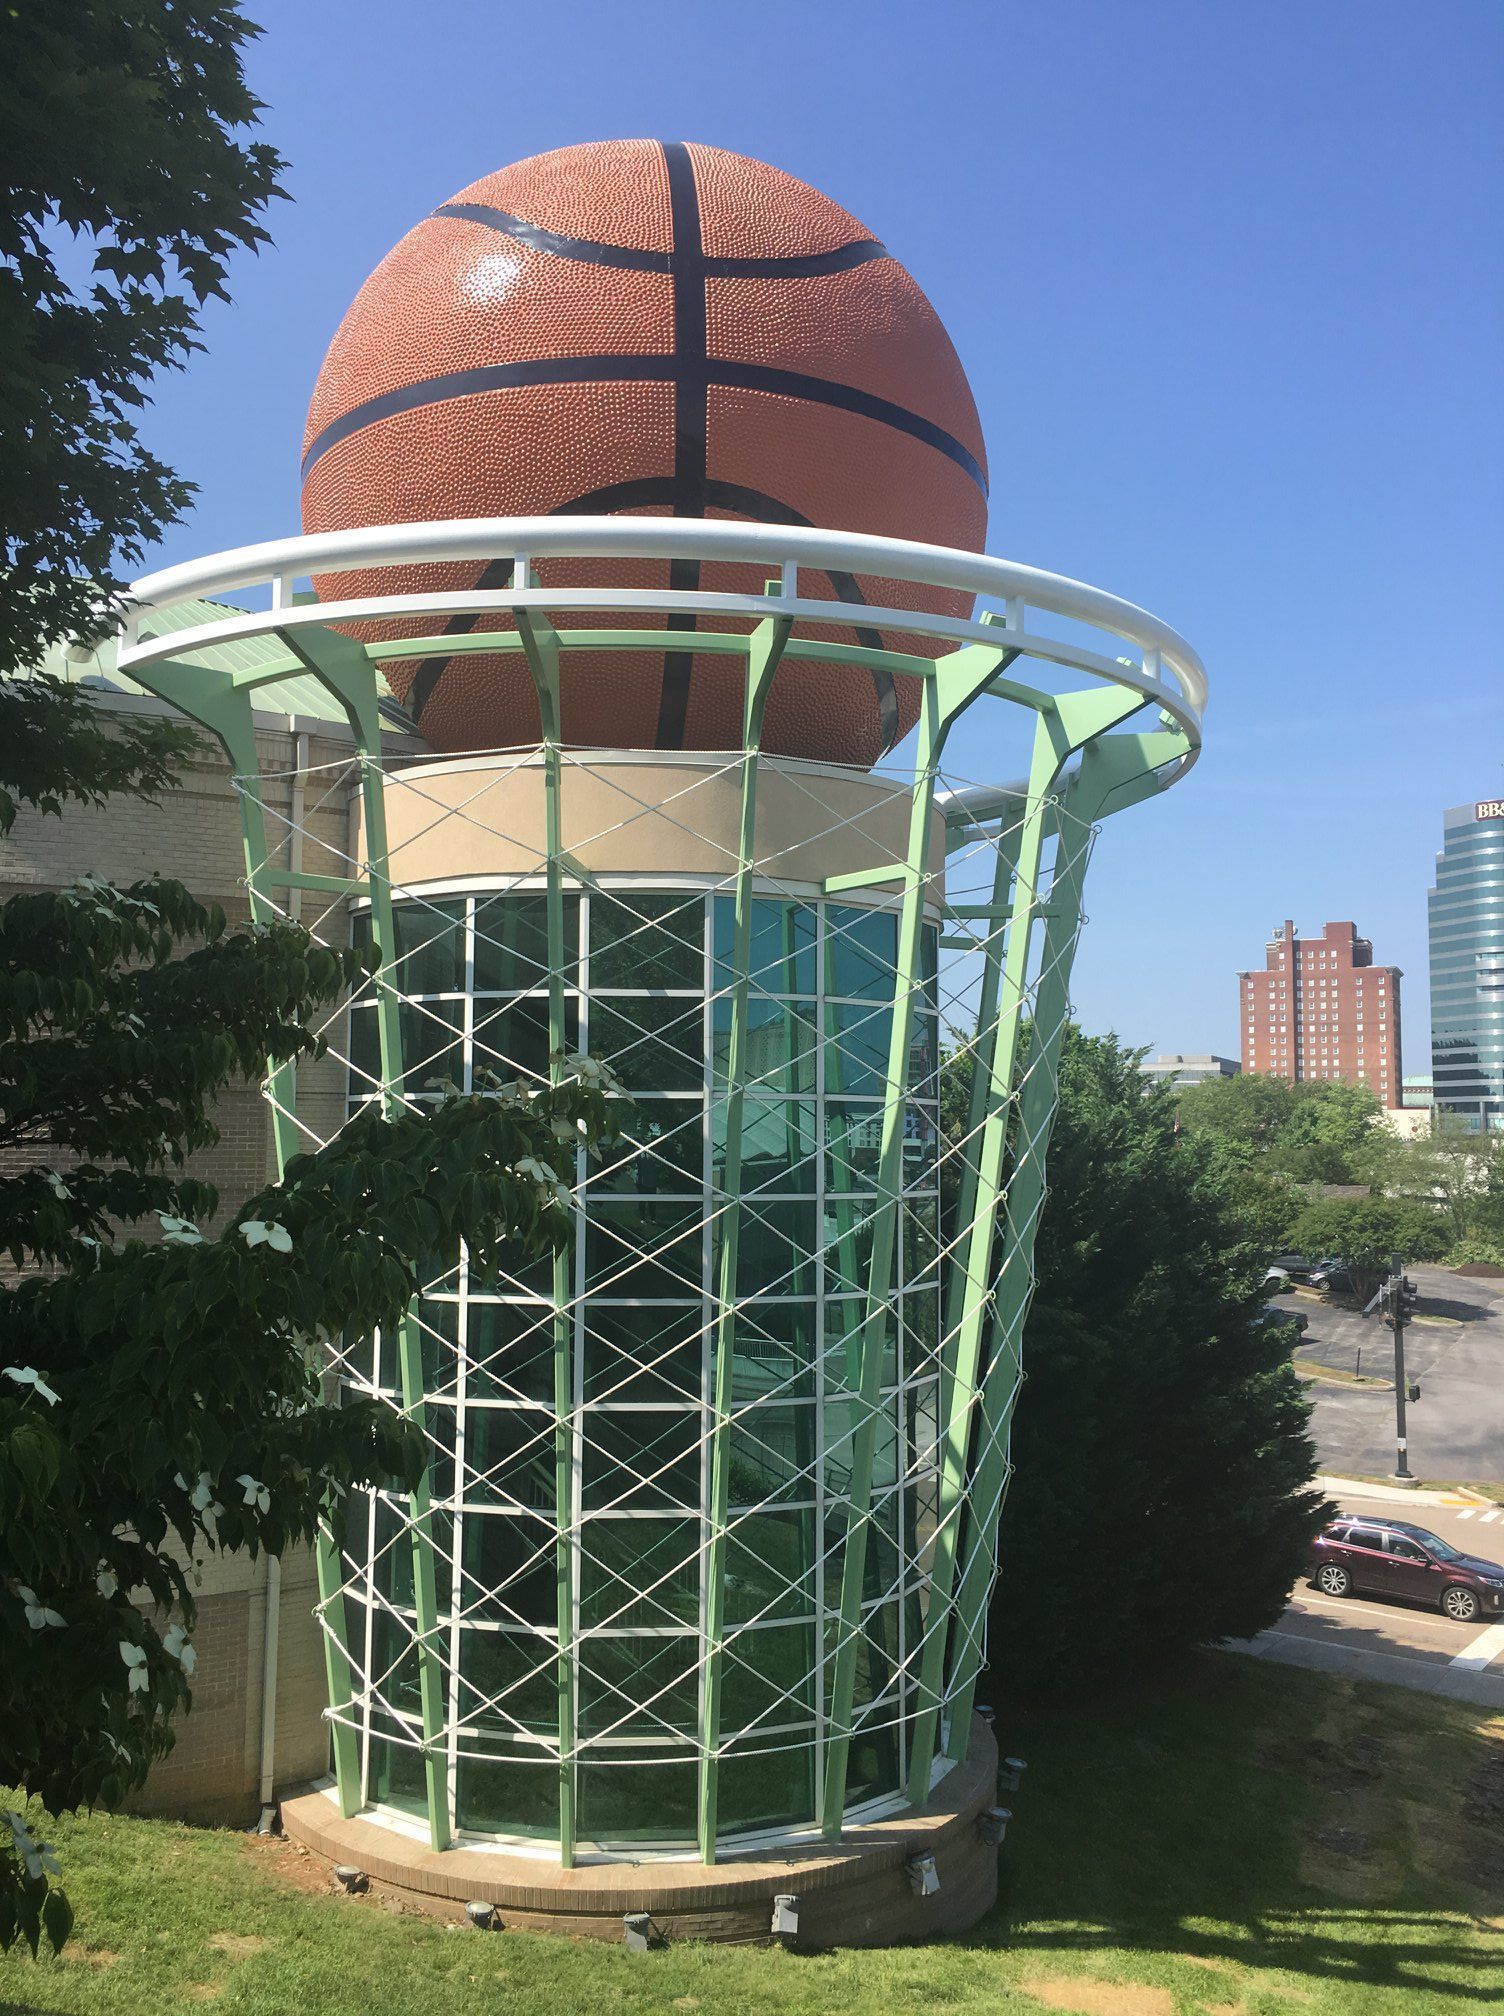 World’s Largest Basketball Sculpture: world record in Knoxville, Tennessee